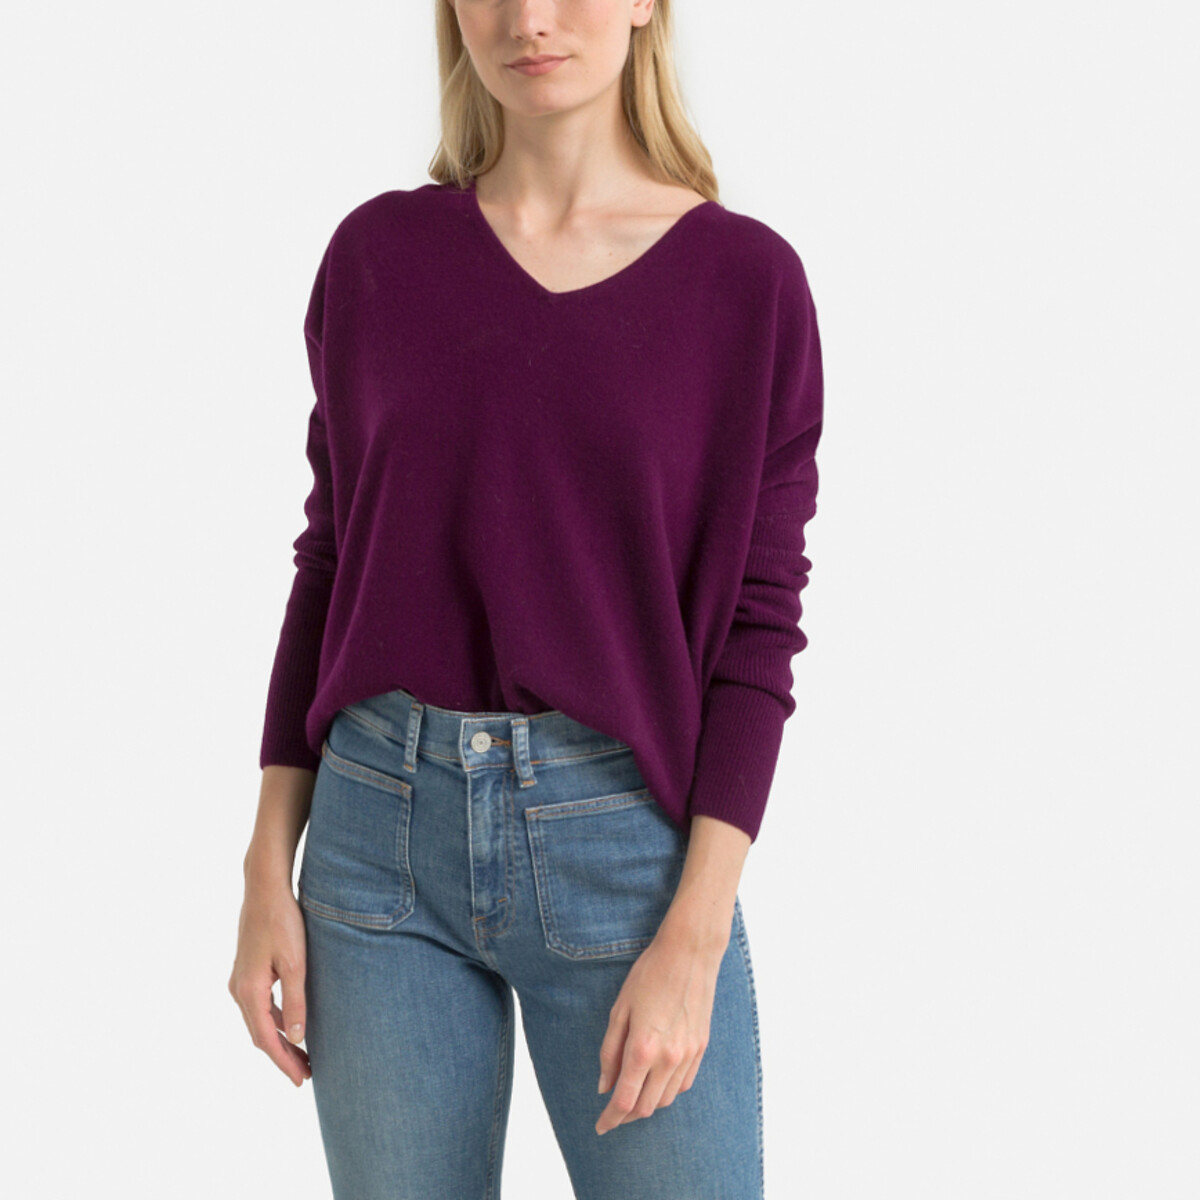 Image of Arnito Blueberry Jumper in Merino Wool with V-Neck